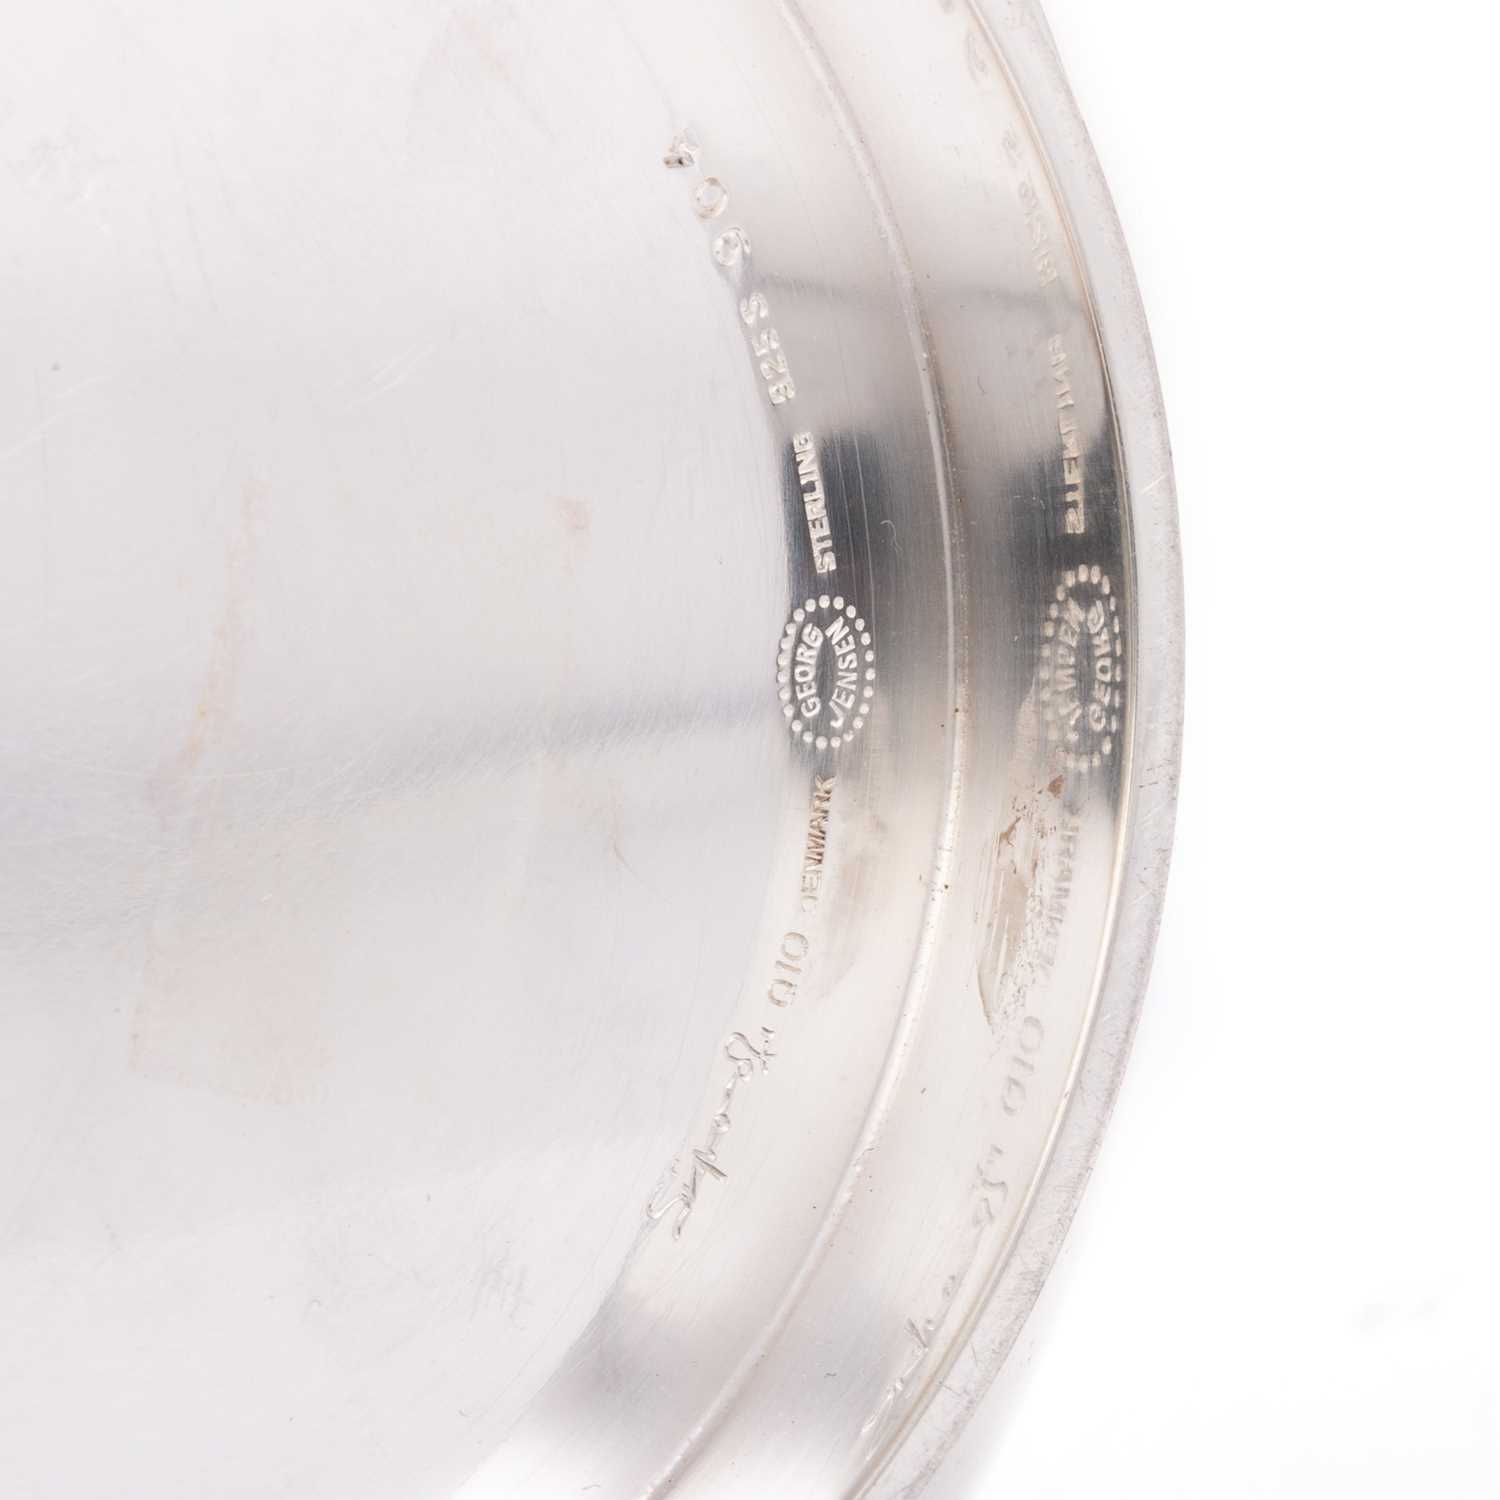 SIGVARD BERNADOTTE FOR GEORG JENSEN: A PAIR OF DANISH SILVER BOWLS - Image 2 of 2